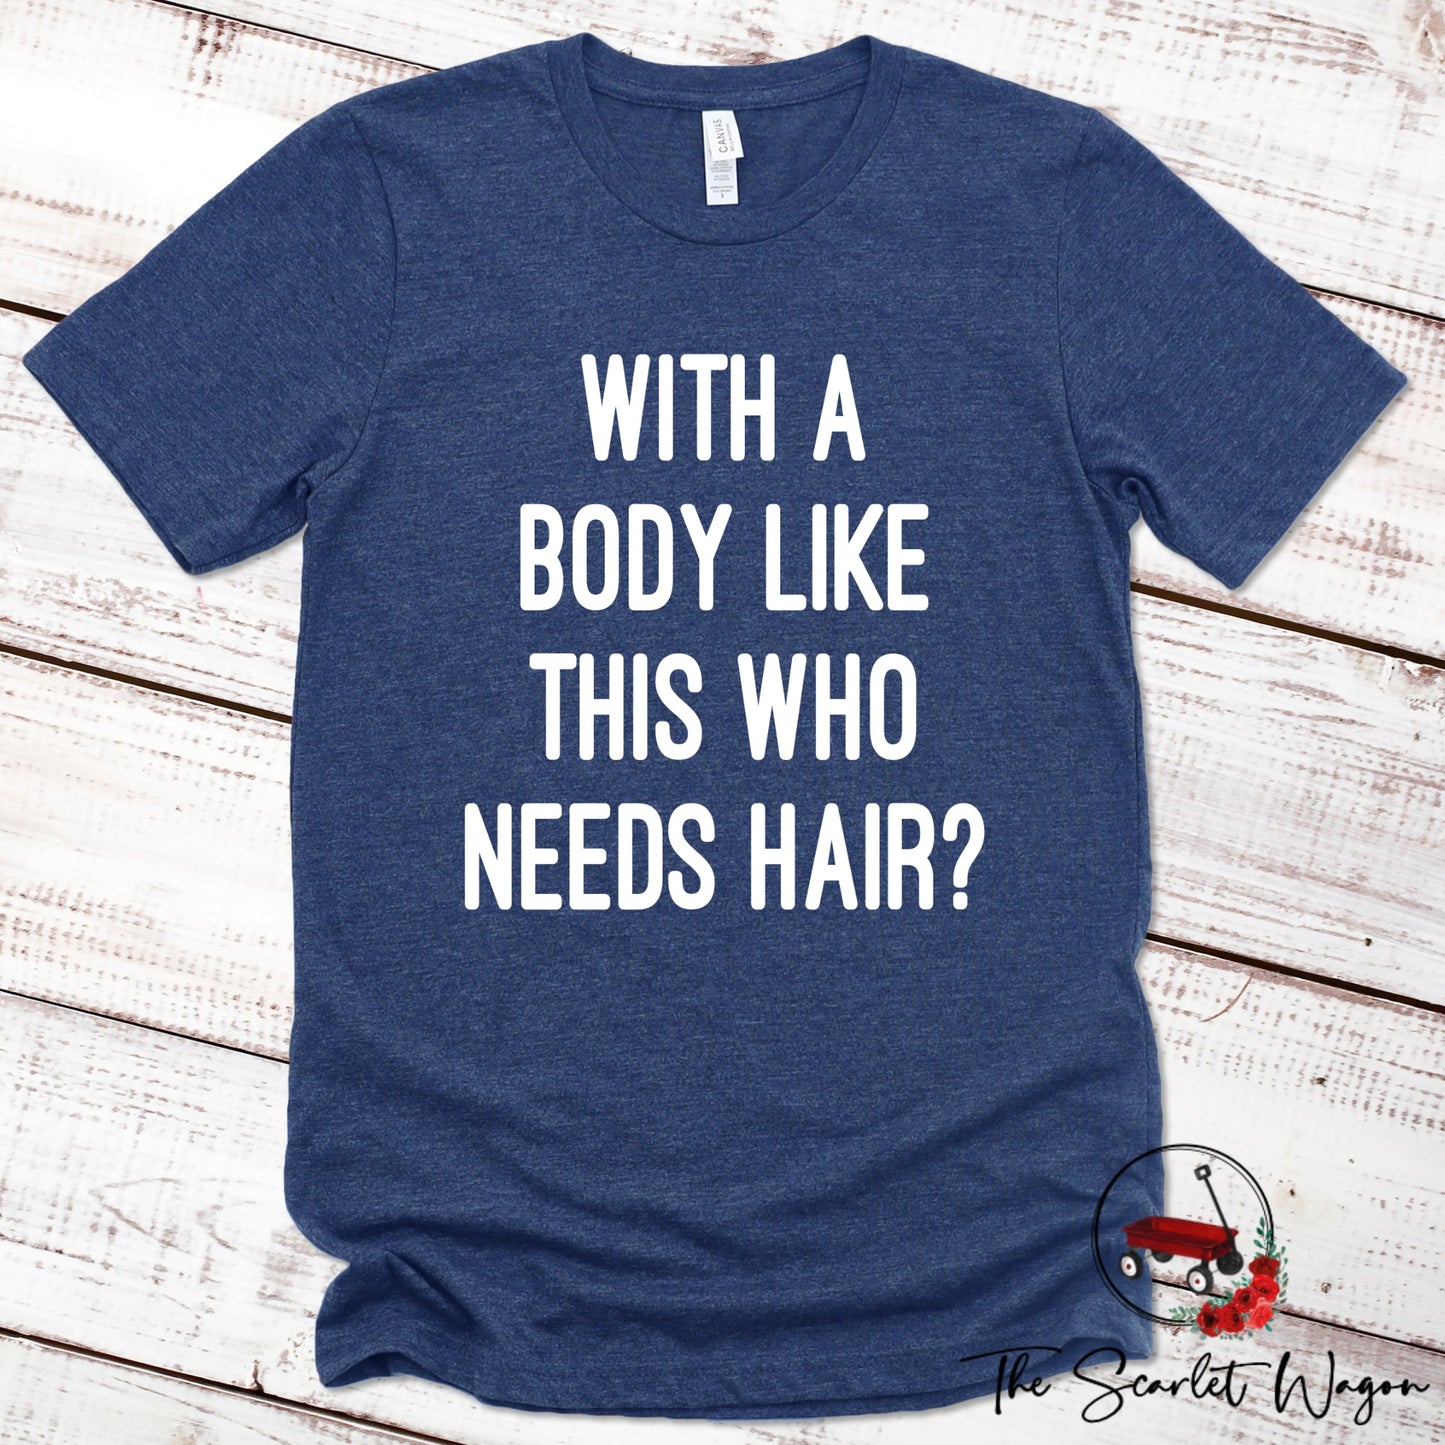 With a Body Like This Who Needs Hair Premium Tee Scarlet Wagon Heather Navy XS 